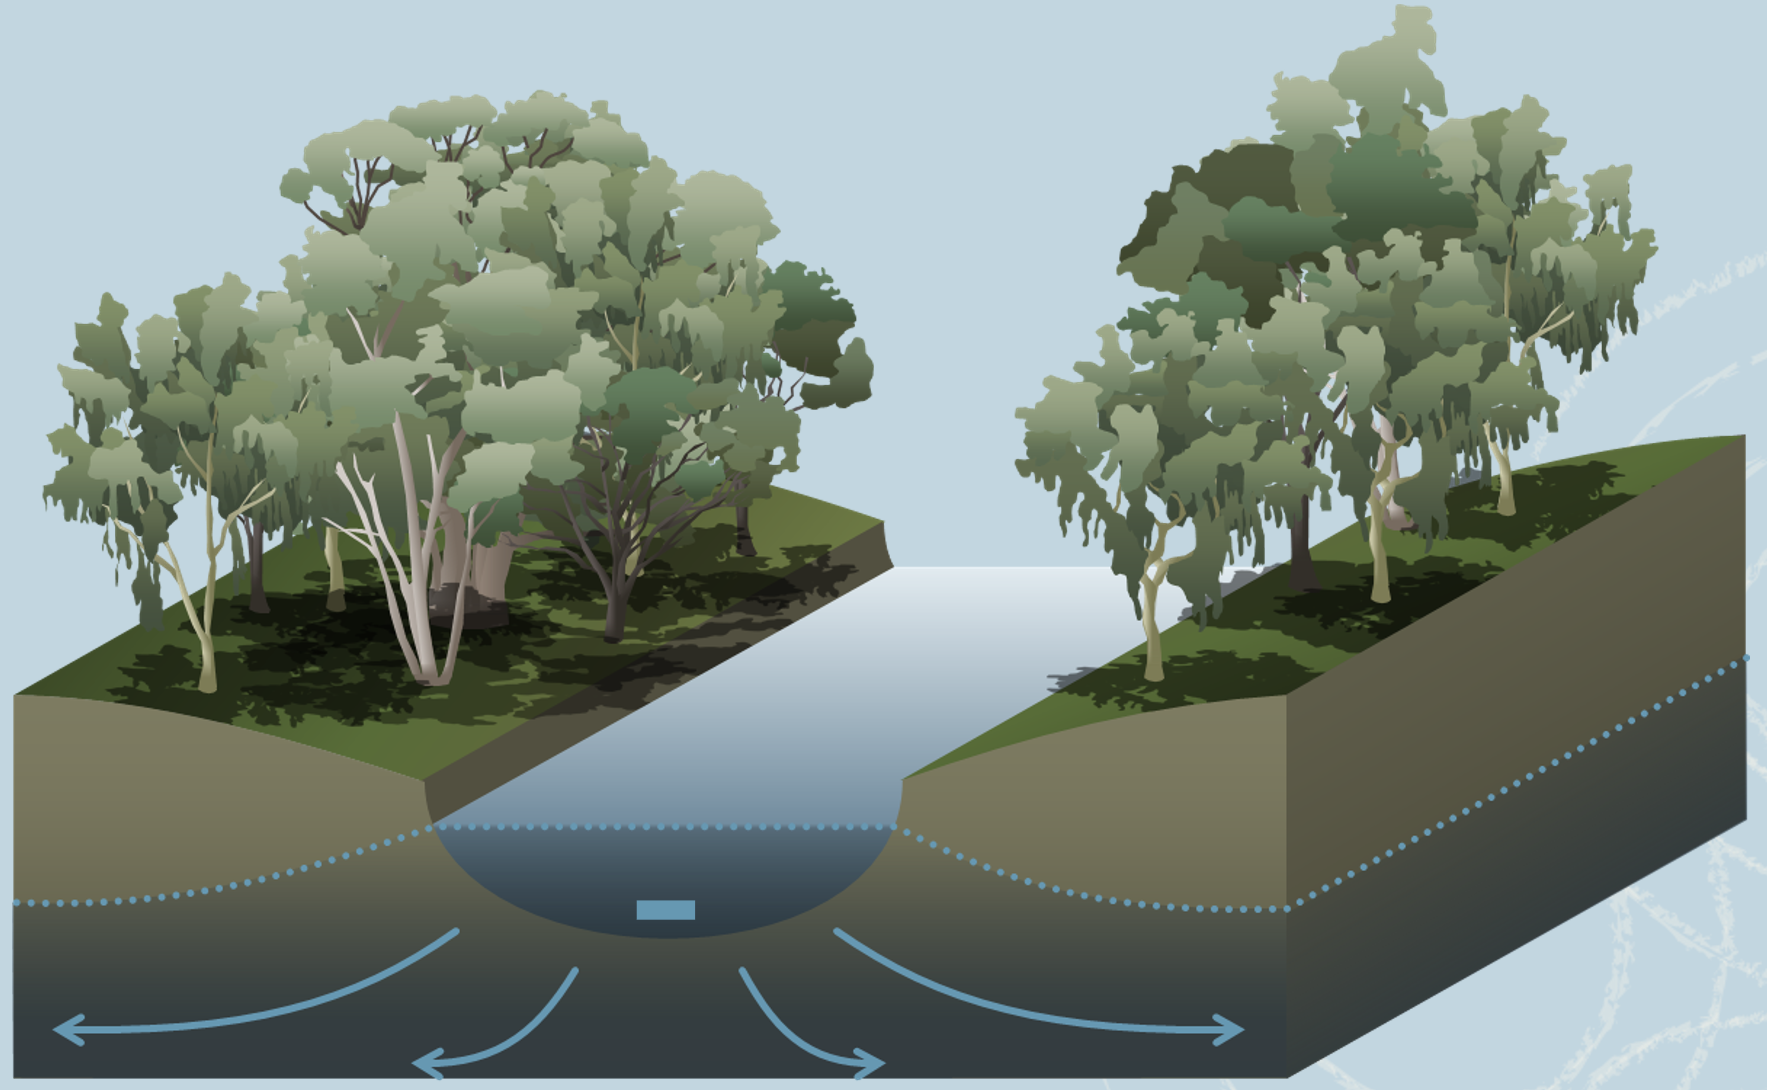 Groundwater channel recharge conceptual model. Image by Queensland Government